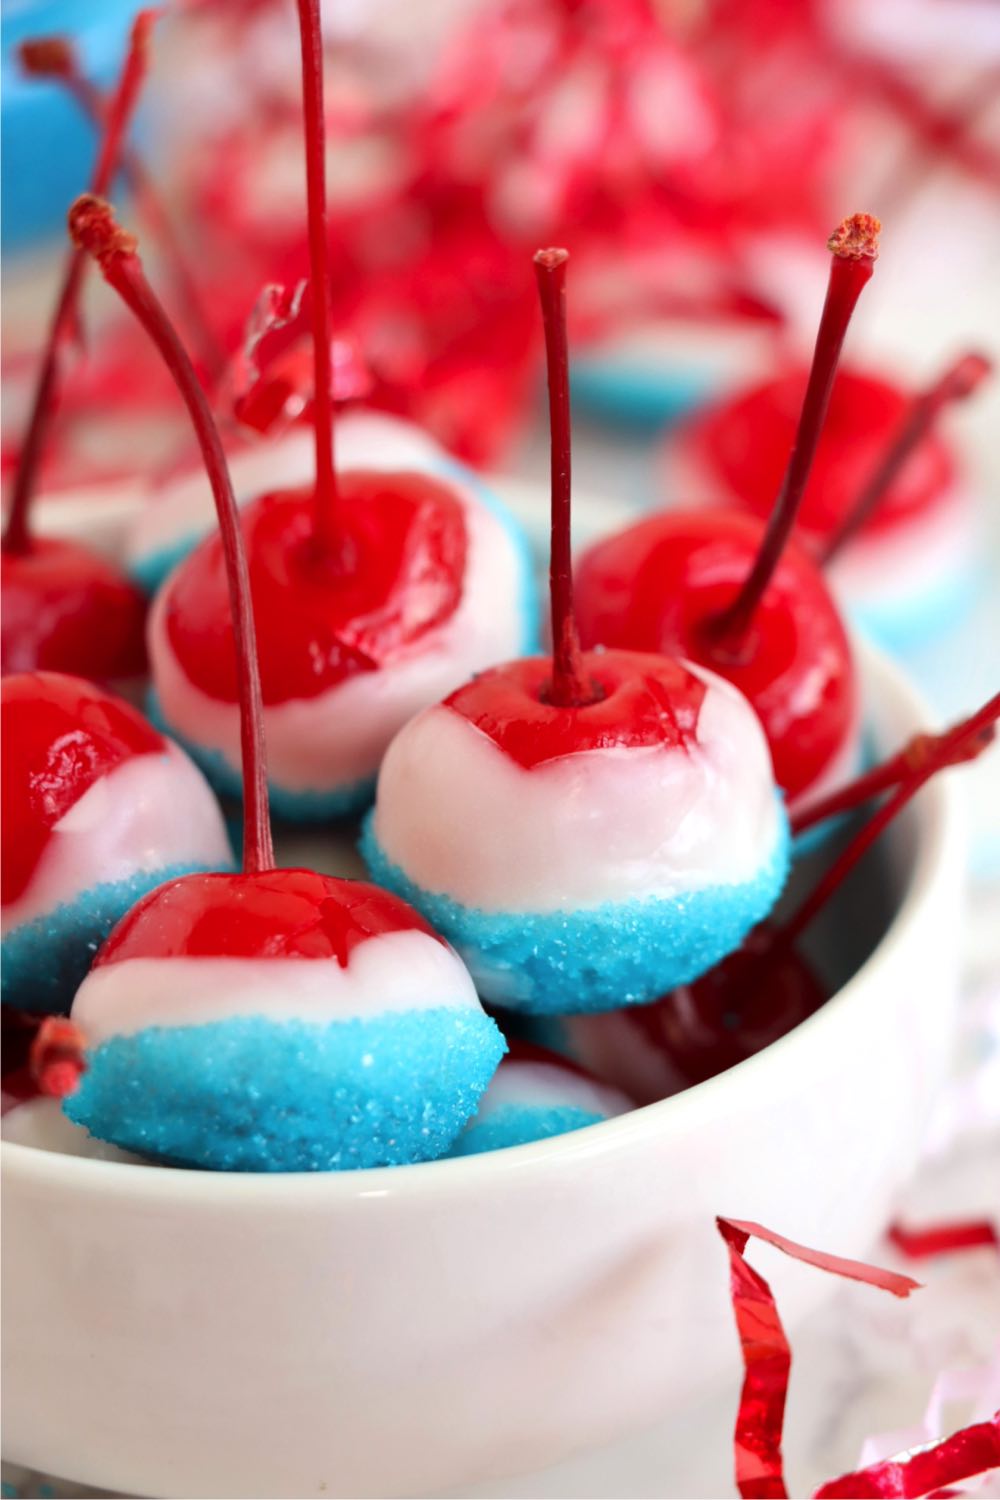 White bowl filled with red, white and blue decorated cherries.